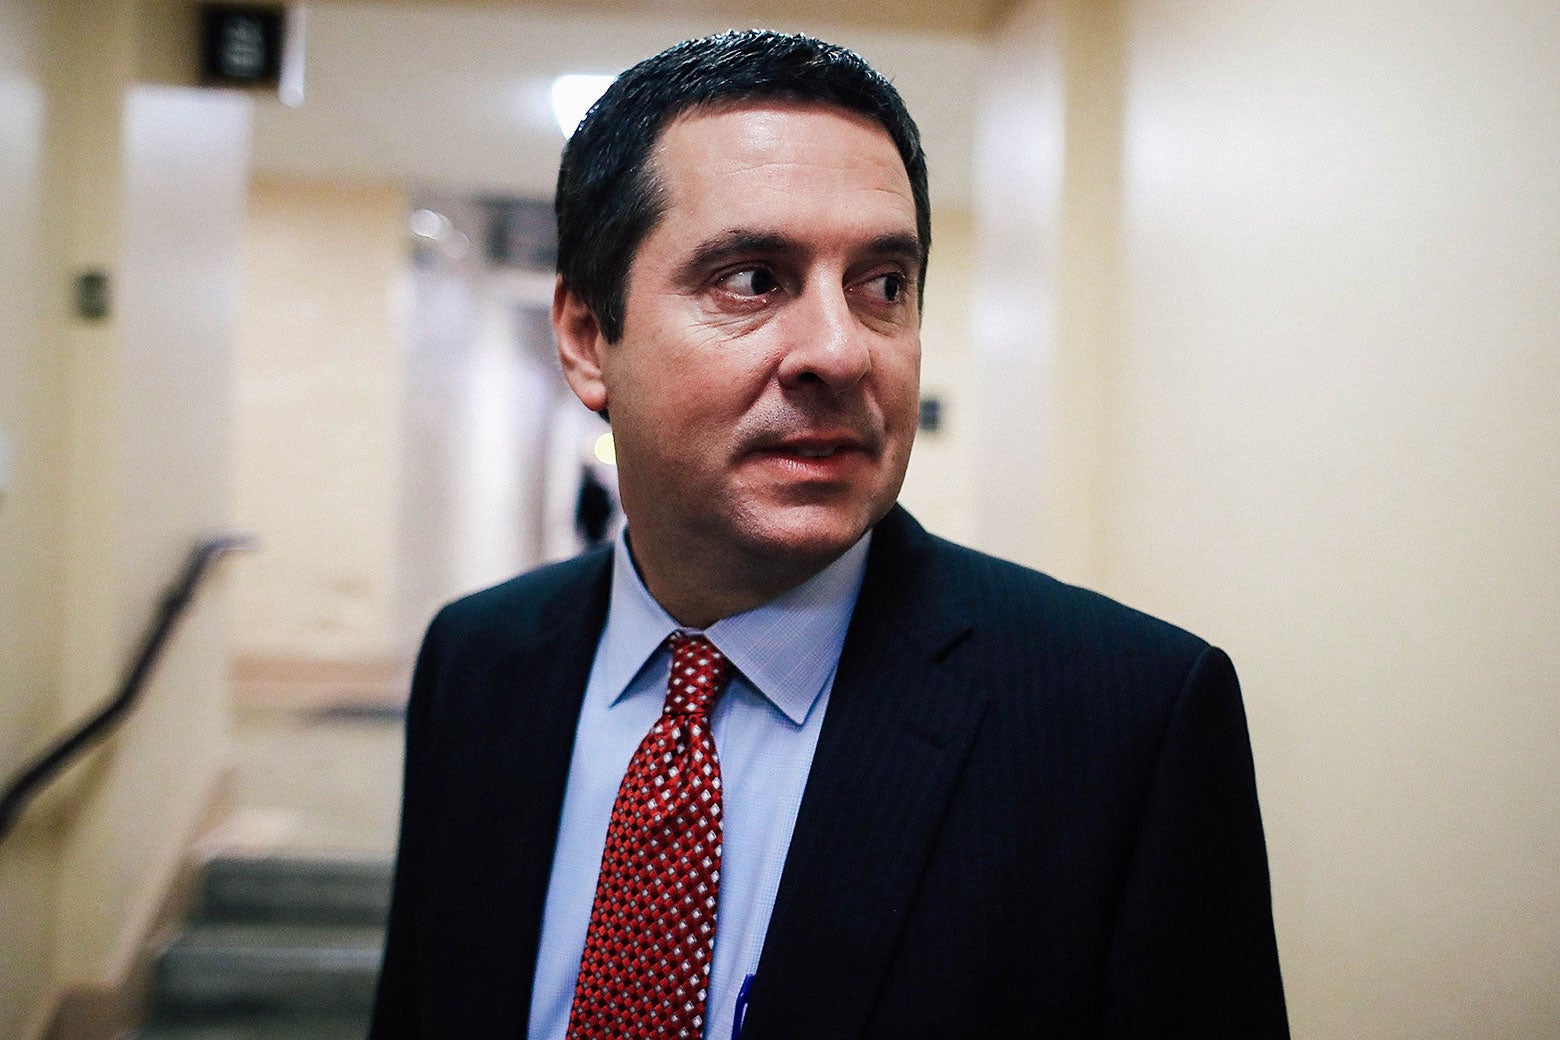 California Rep. Devin Nunes, chairman of the House Permanent Select Committee on Intelligence, walks away from a meeting with House GOP members on Jan. 30 in Washington.